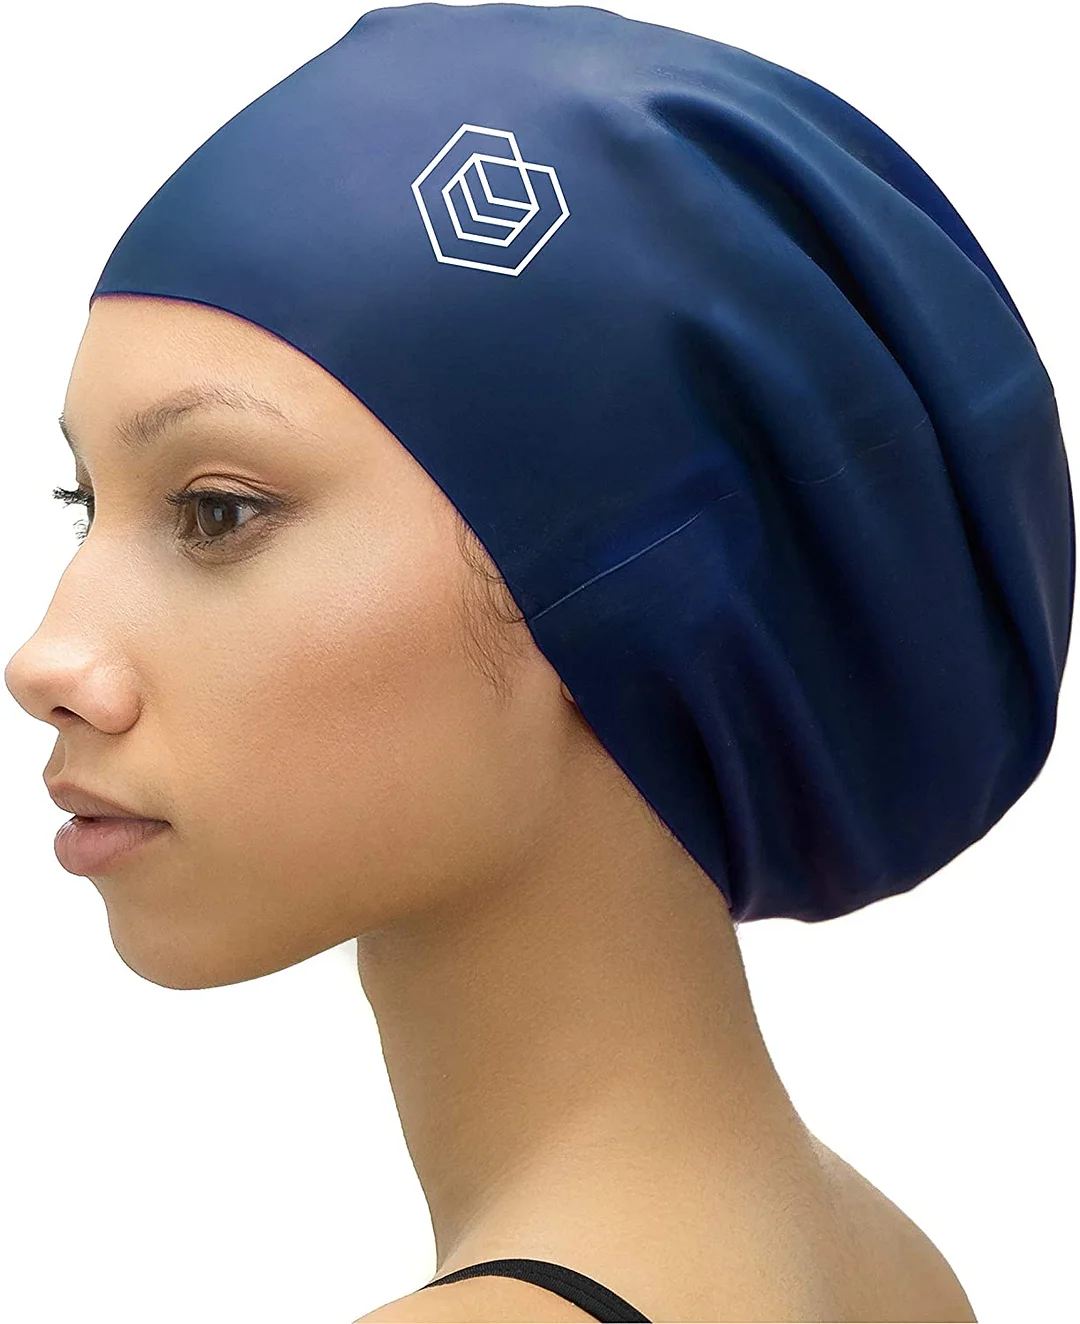 Extra Large Swimming Cap - Designed for Long Hair, Dreadlocks, Weaves, Hair Extensions, Braids, Curls & Afros